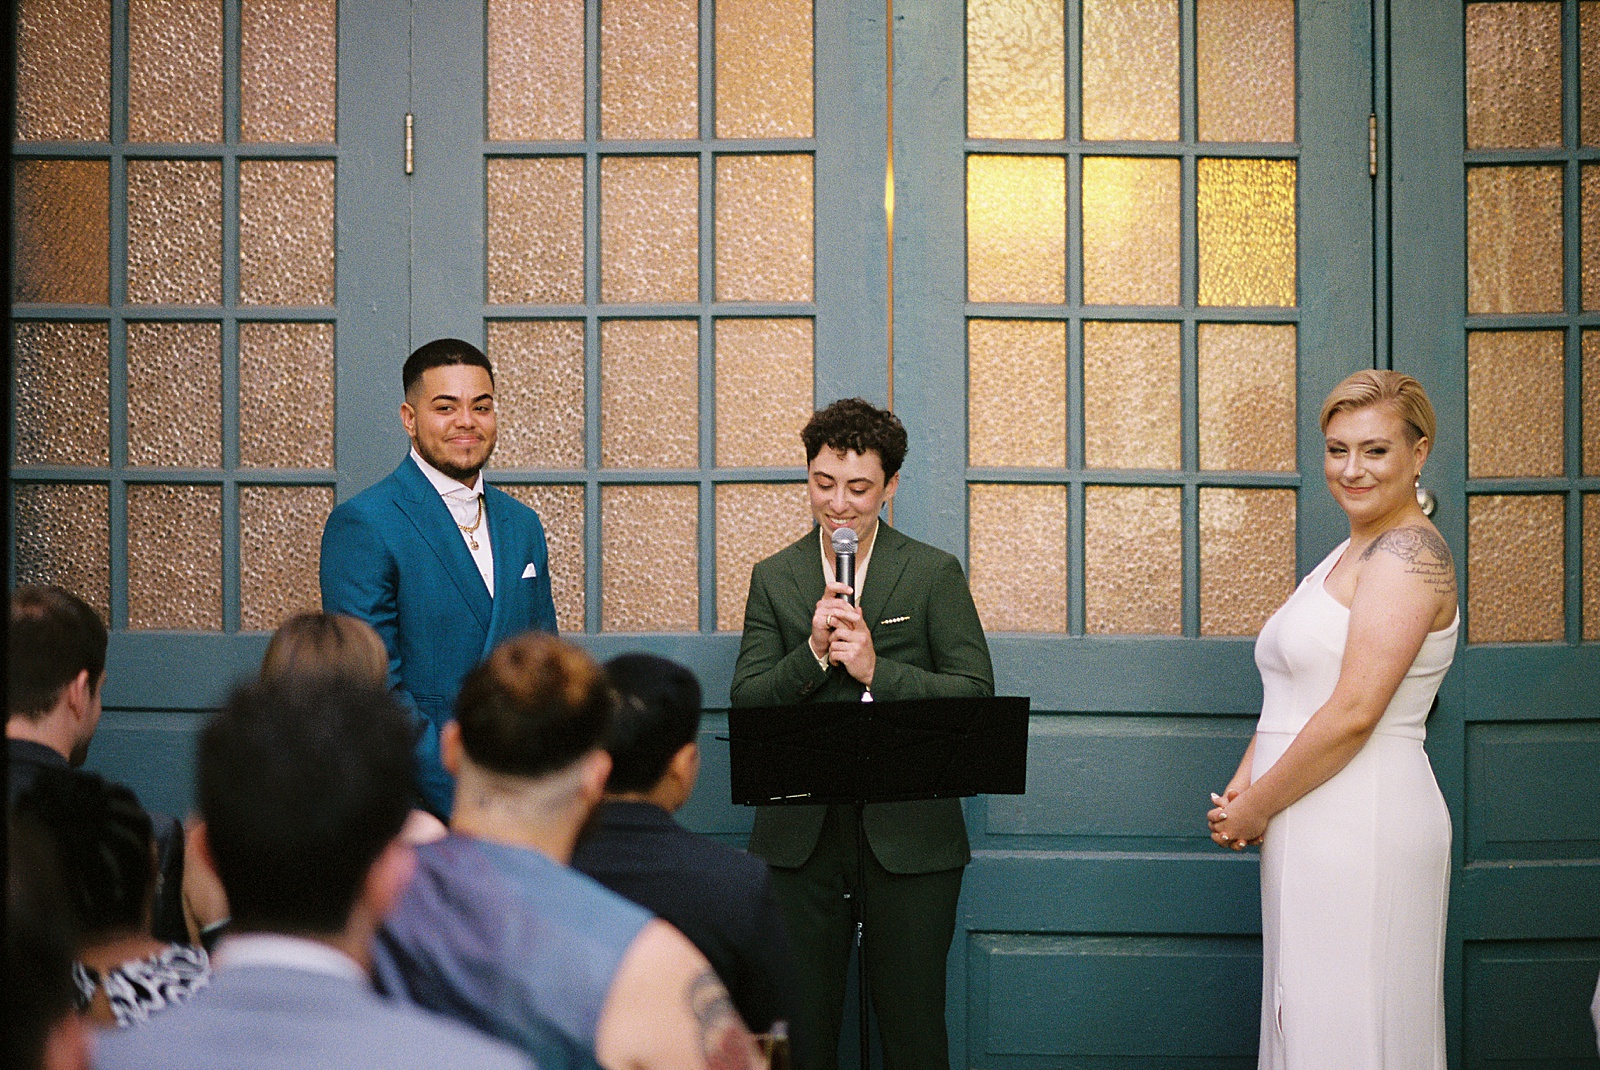 A wedding officiant speaks into a microphone at a Maas Building wedding.